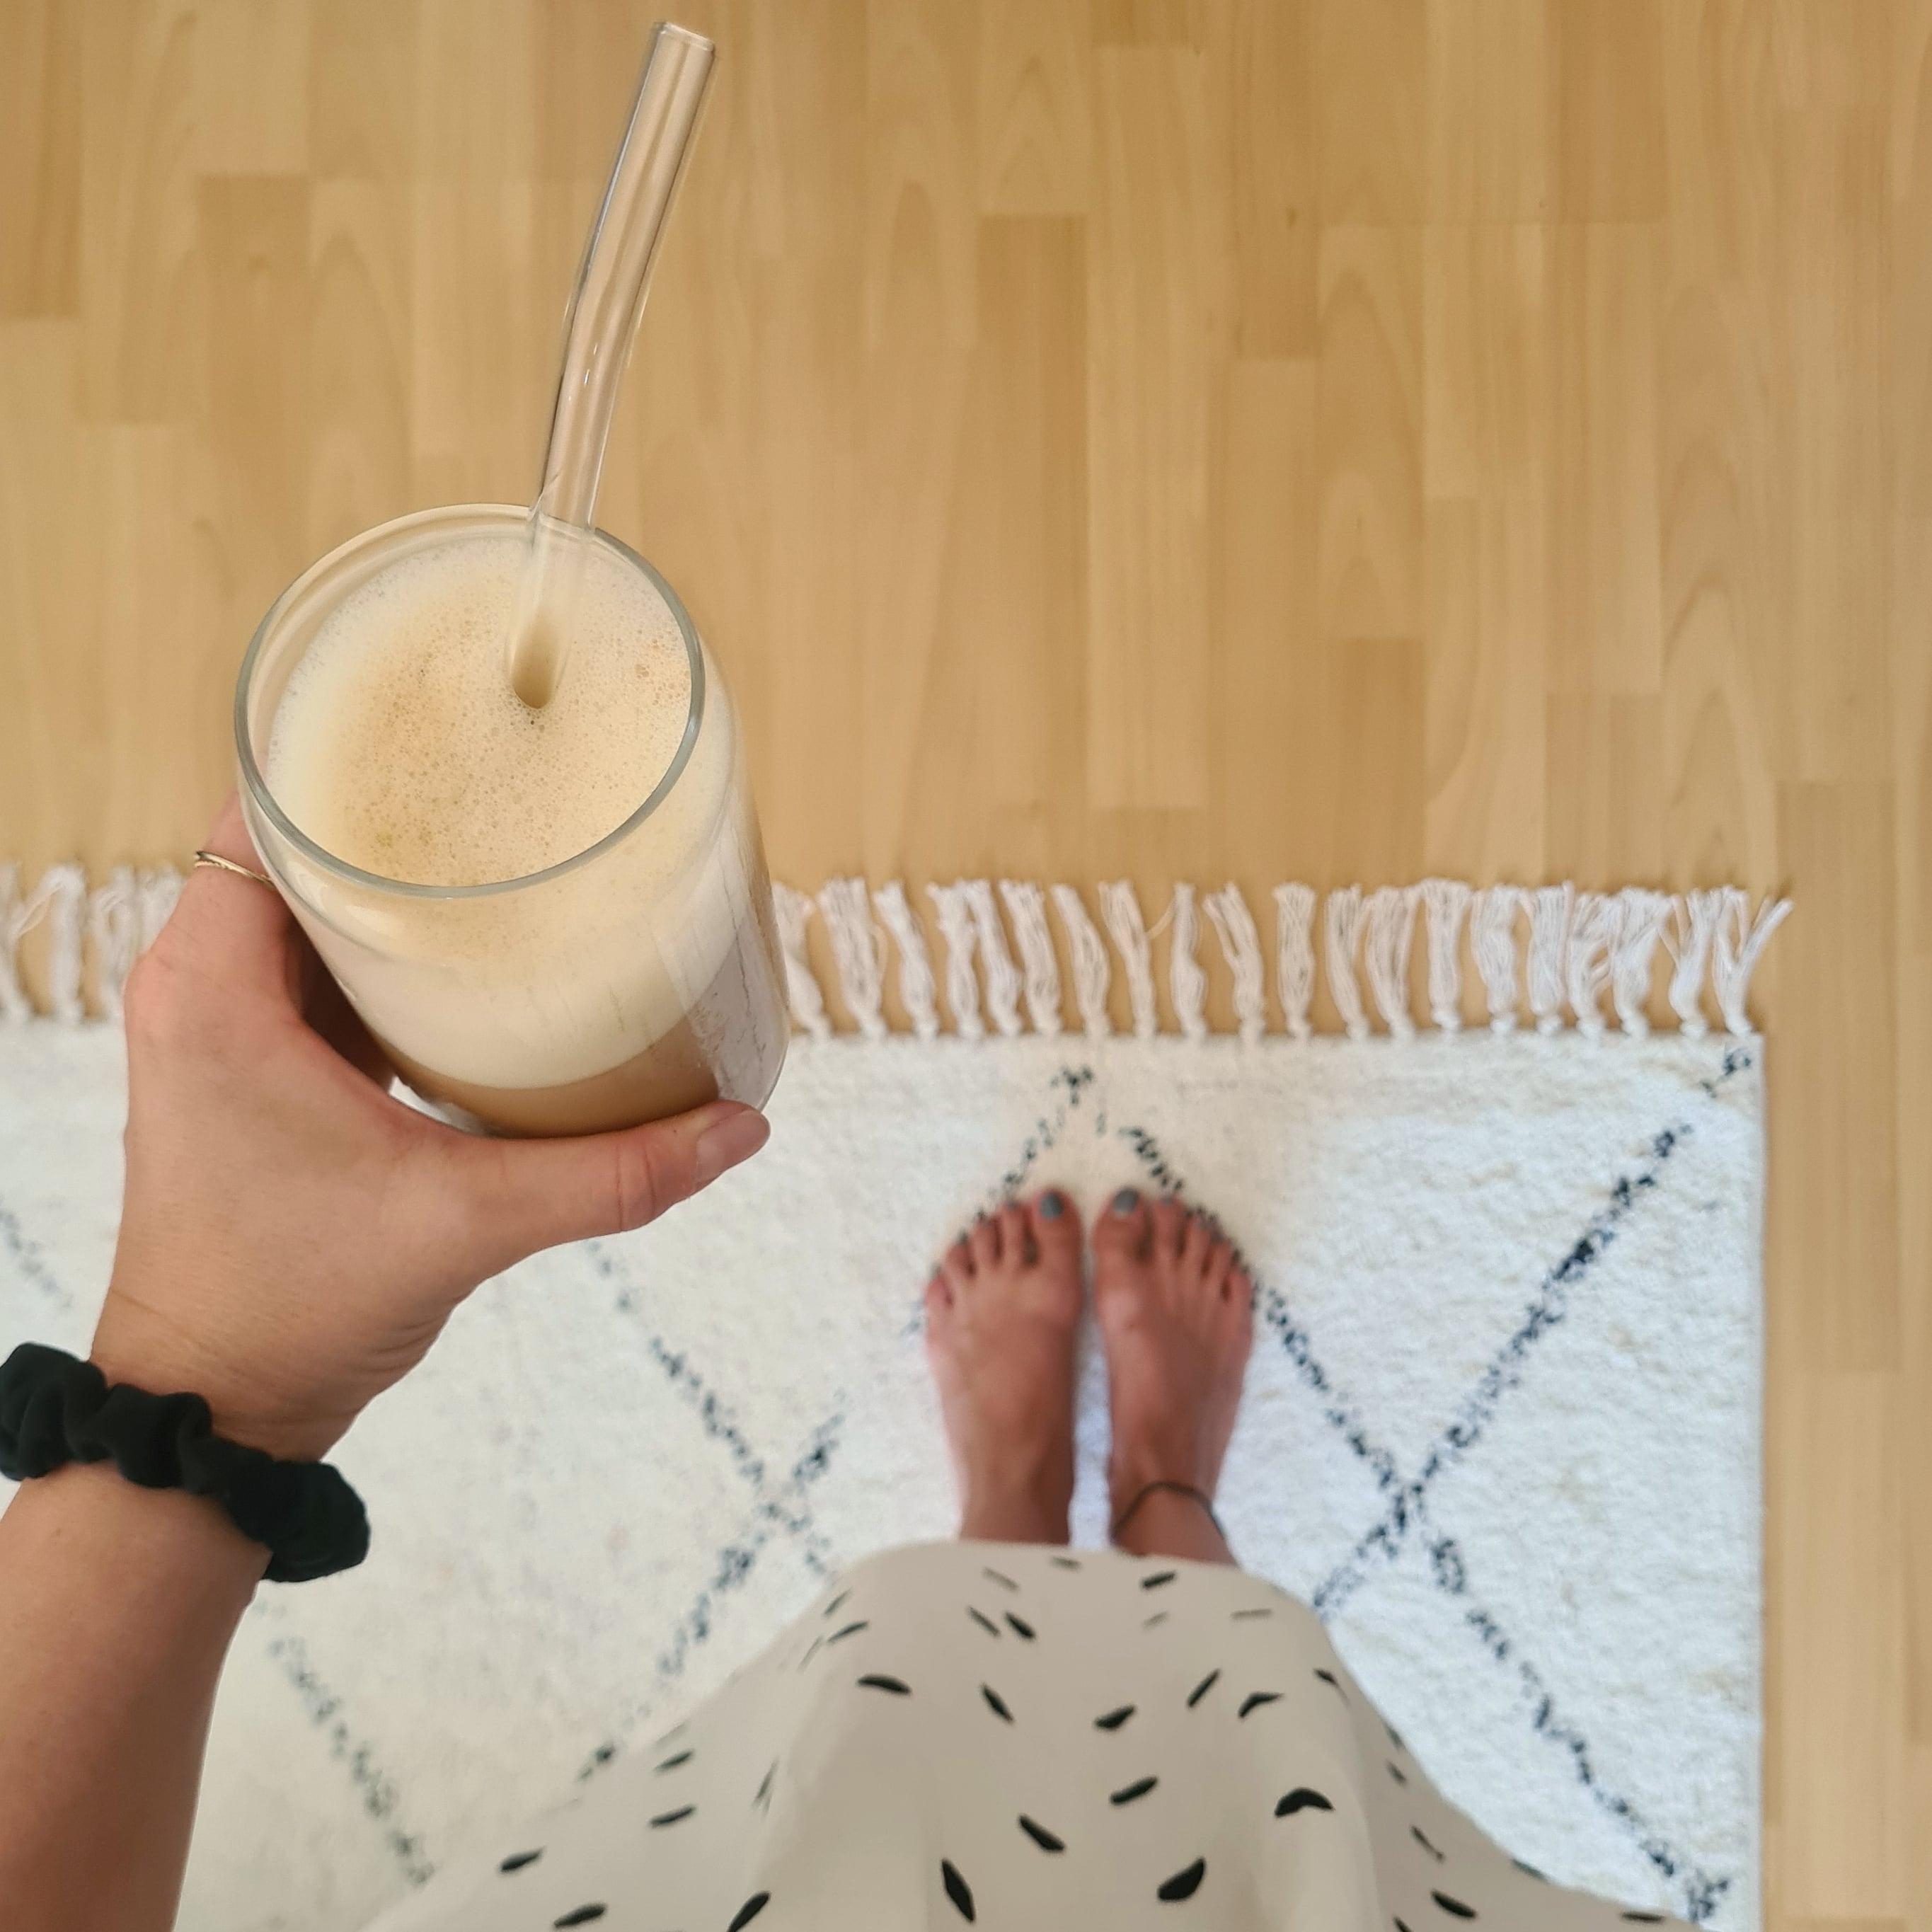 summer should last forever ☀️🥰#icedcoffee #summervibes #ootd